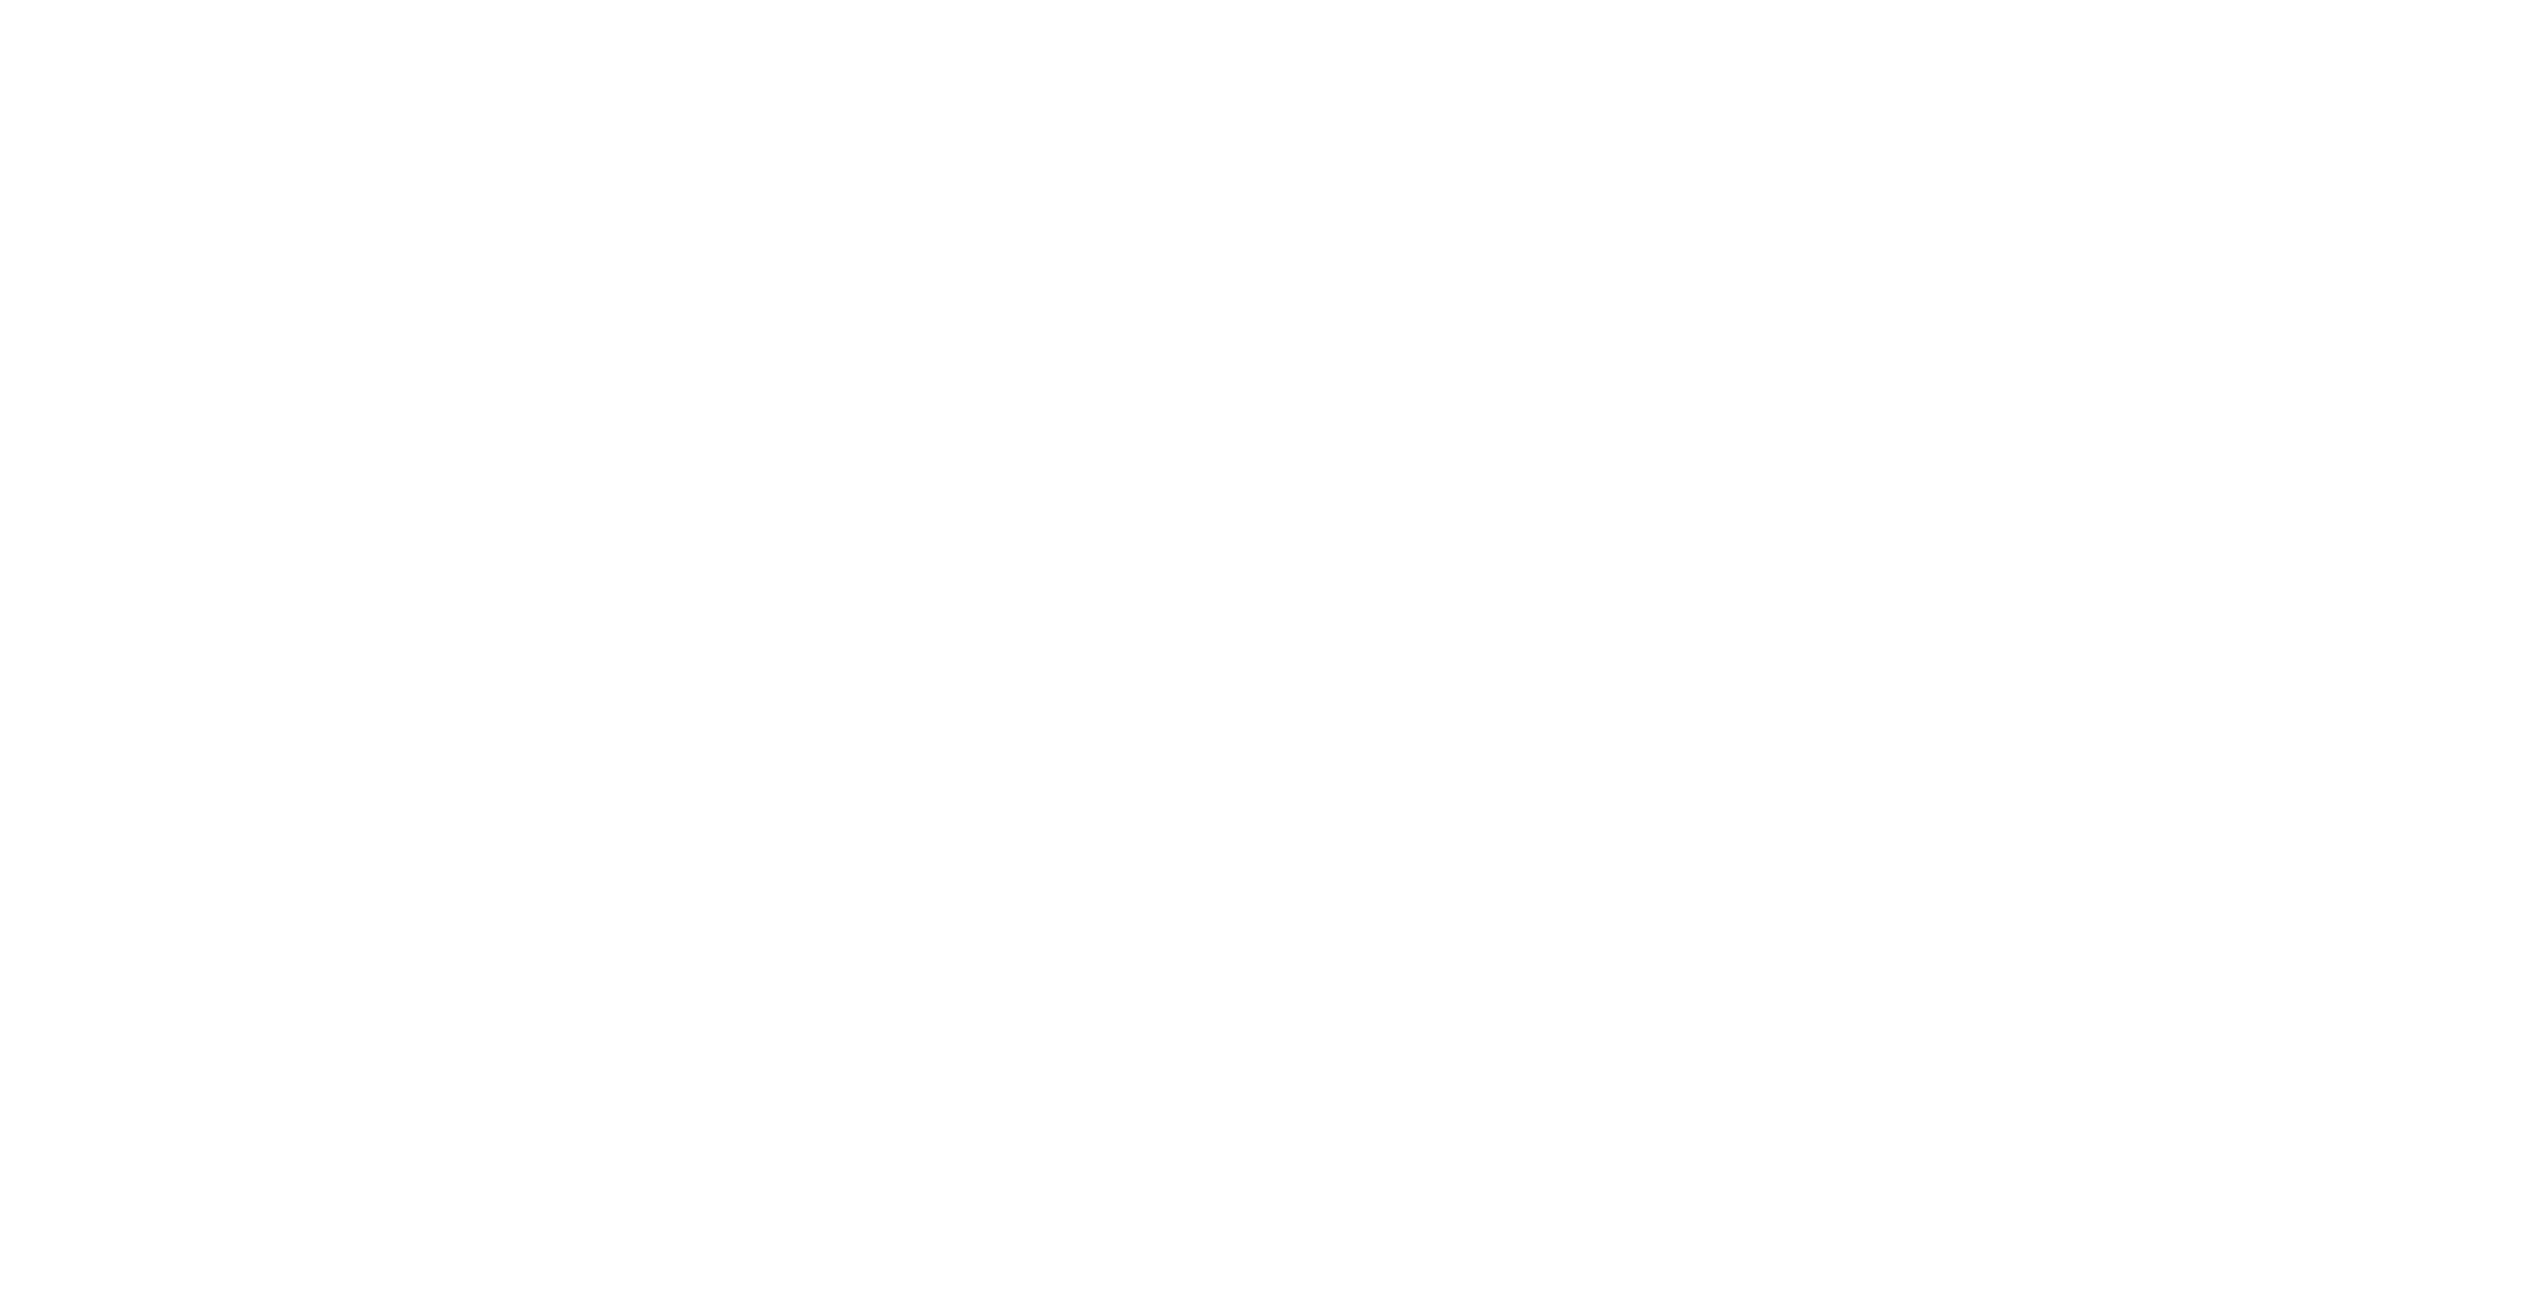 The Real Housewives of Potomac logo